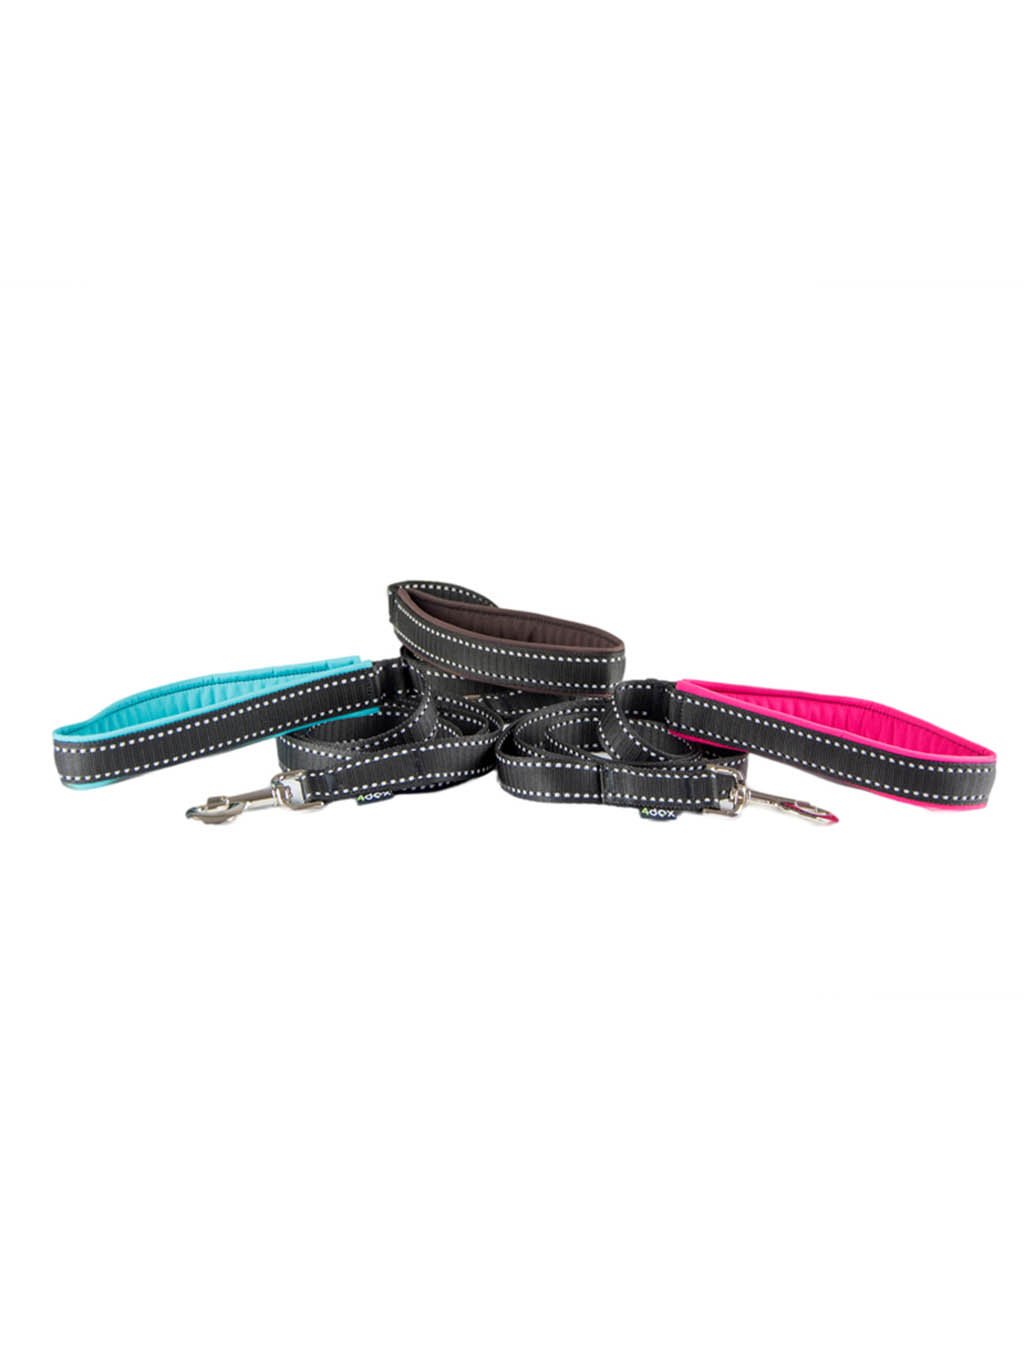 Leash with a reflective tape, TURQUOISE